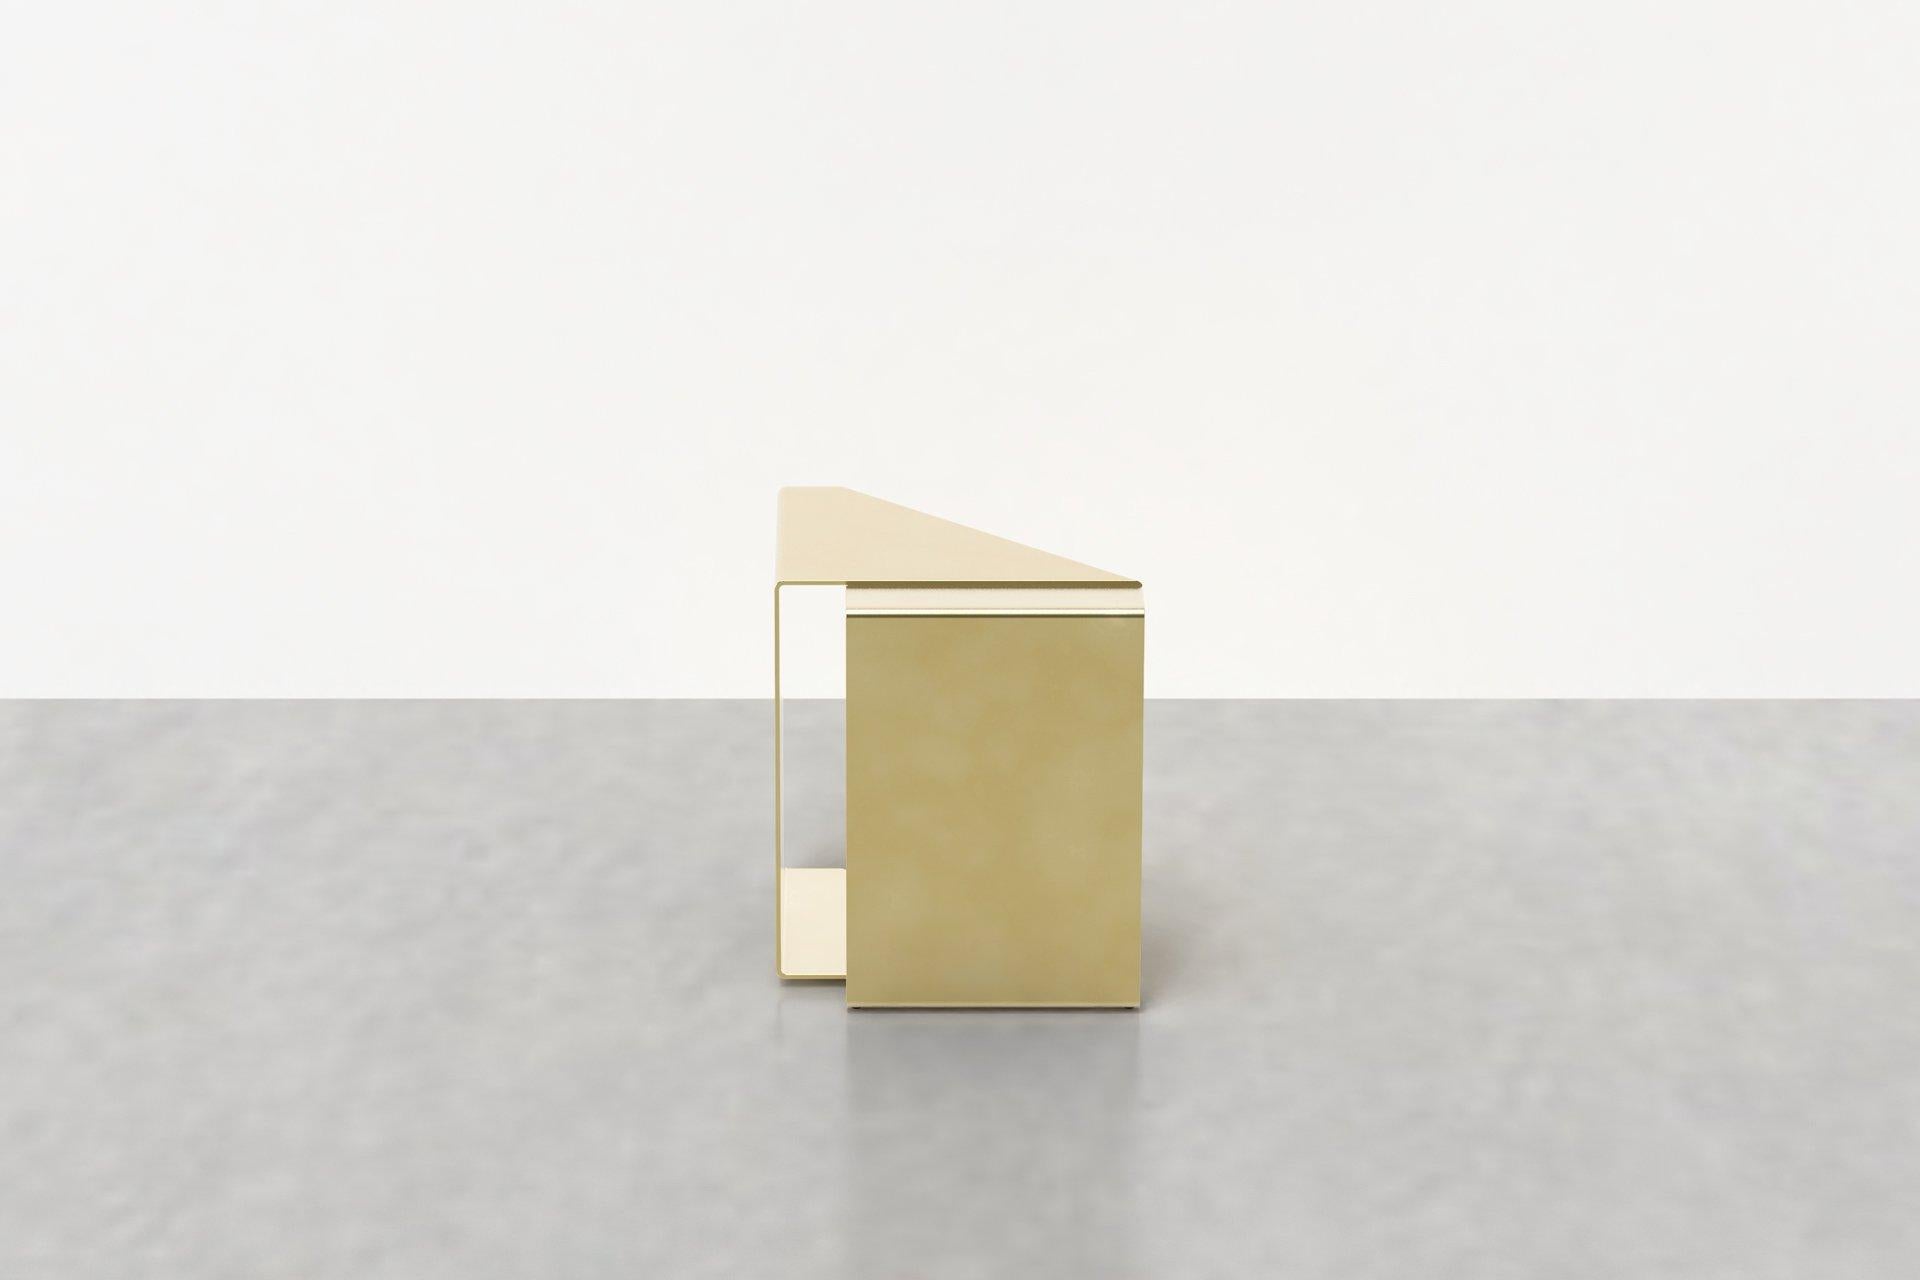 The fold end table in brass reflects pliable strap shapes in sturdy, fixed forms. The fold end table in brass is handmade in our studio from solid brass, and available in a range of custom finishes inspired by the changing patina of metal as it is